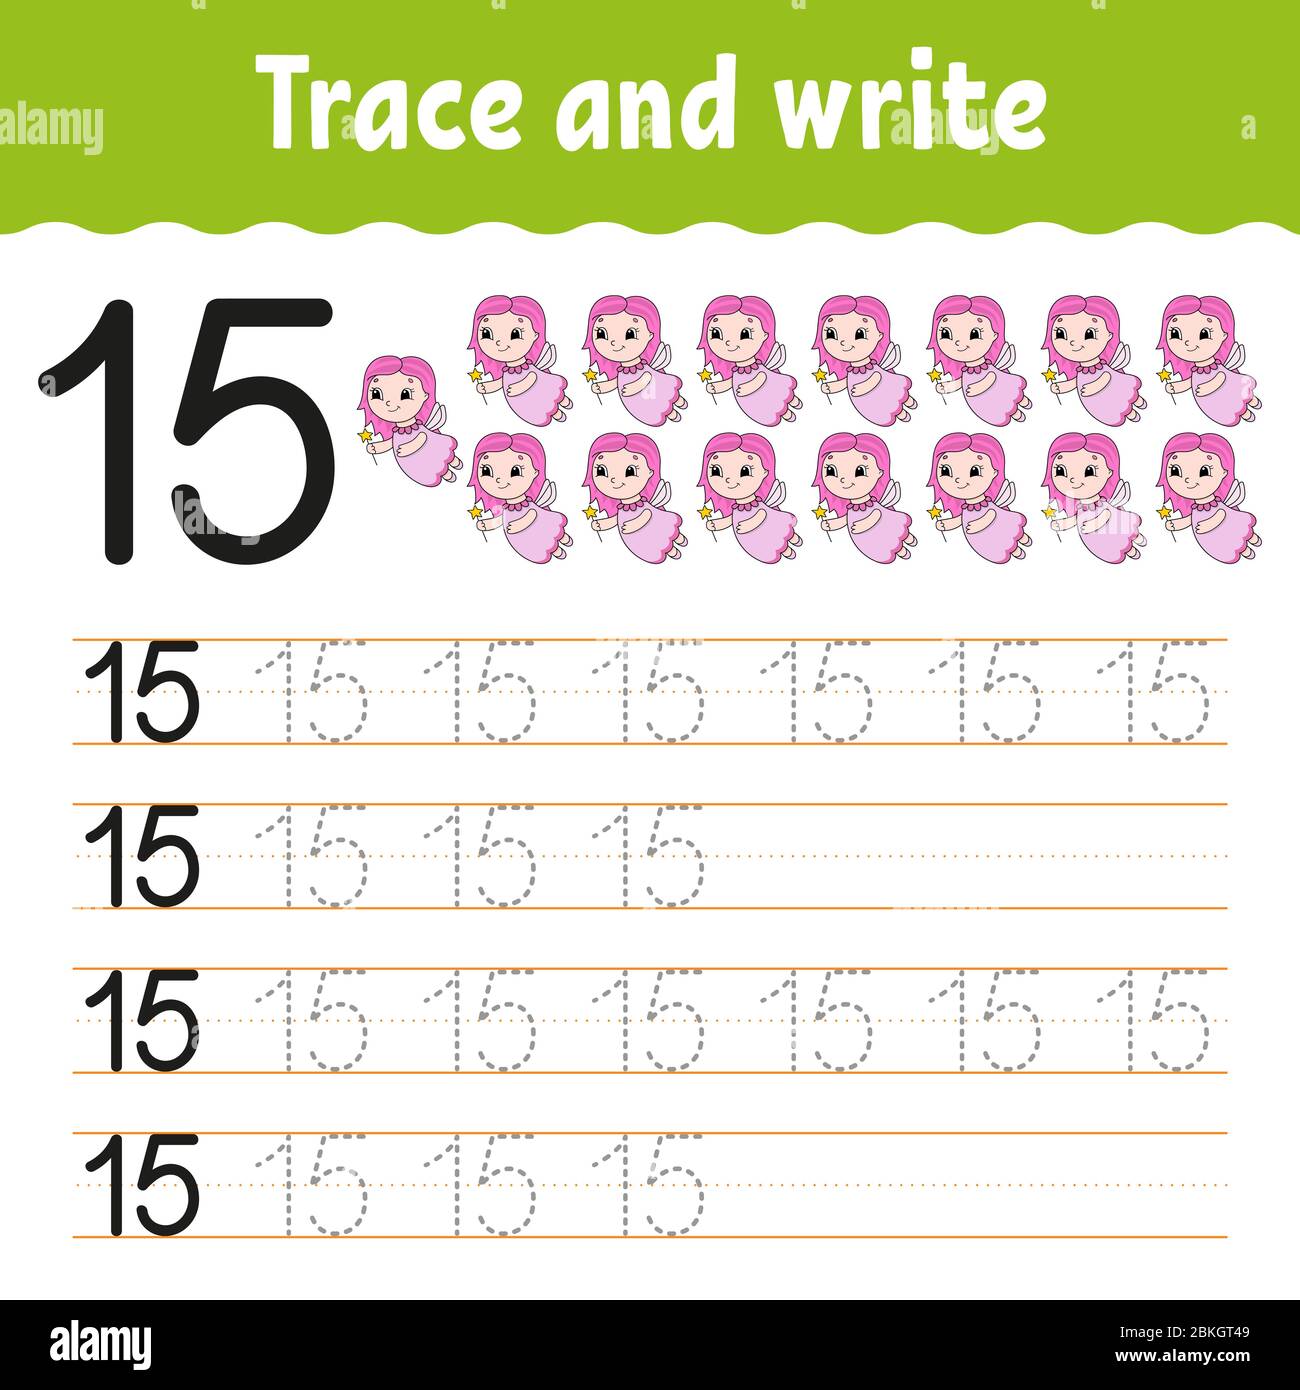 Trace and write. Number 14. Handwriting practice. Learning numbers